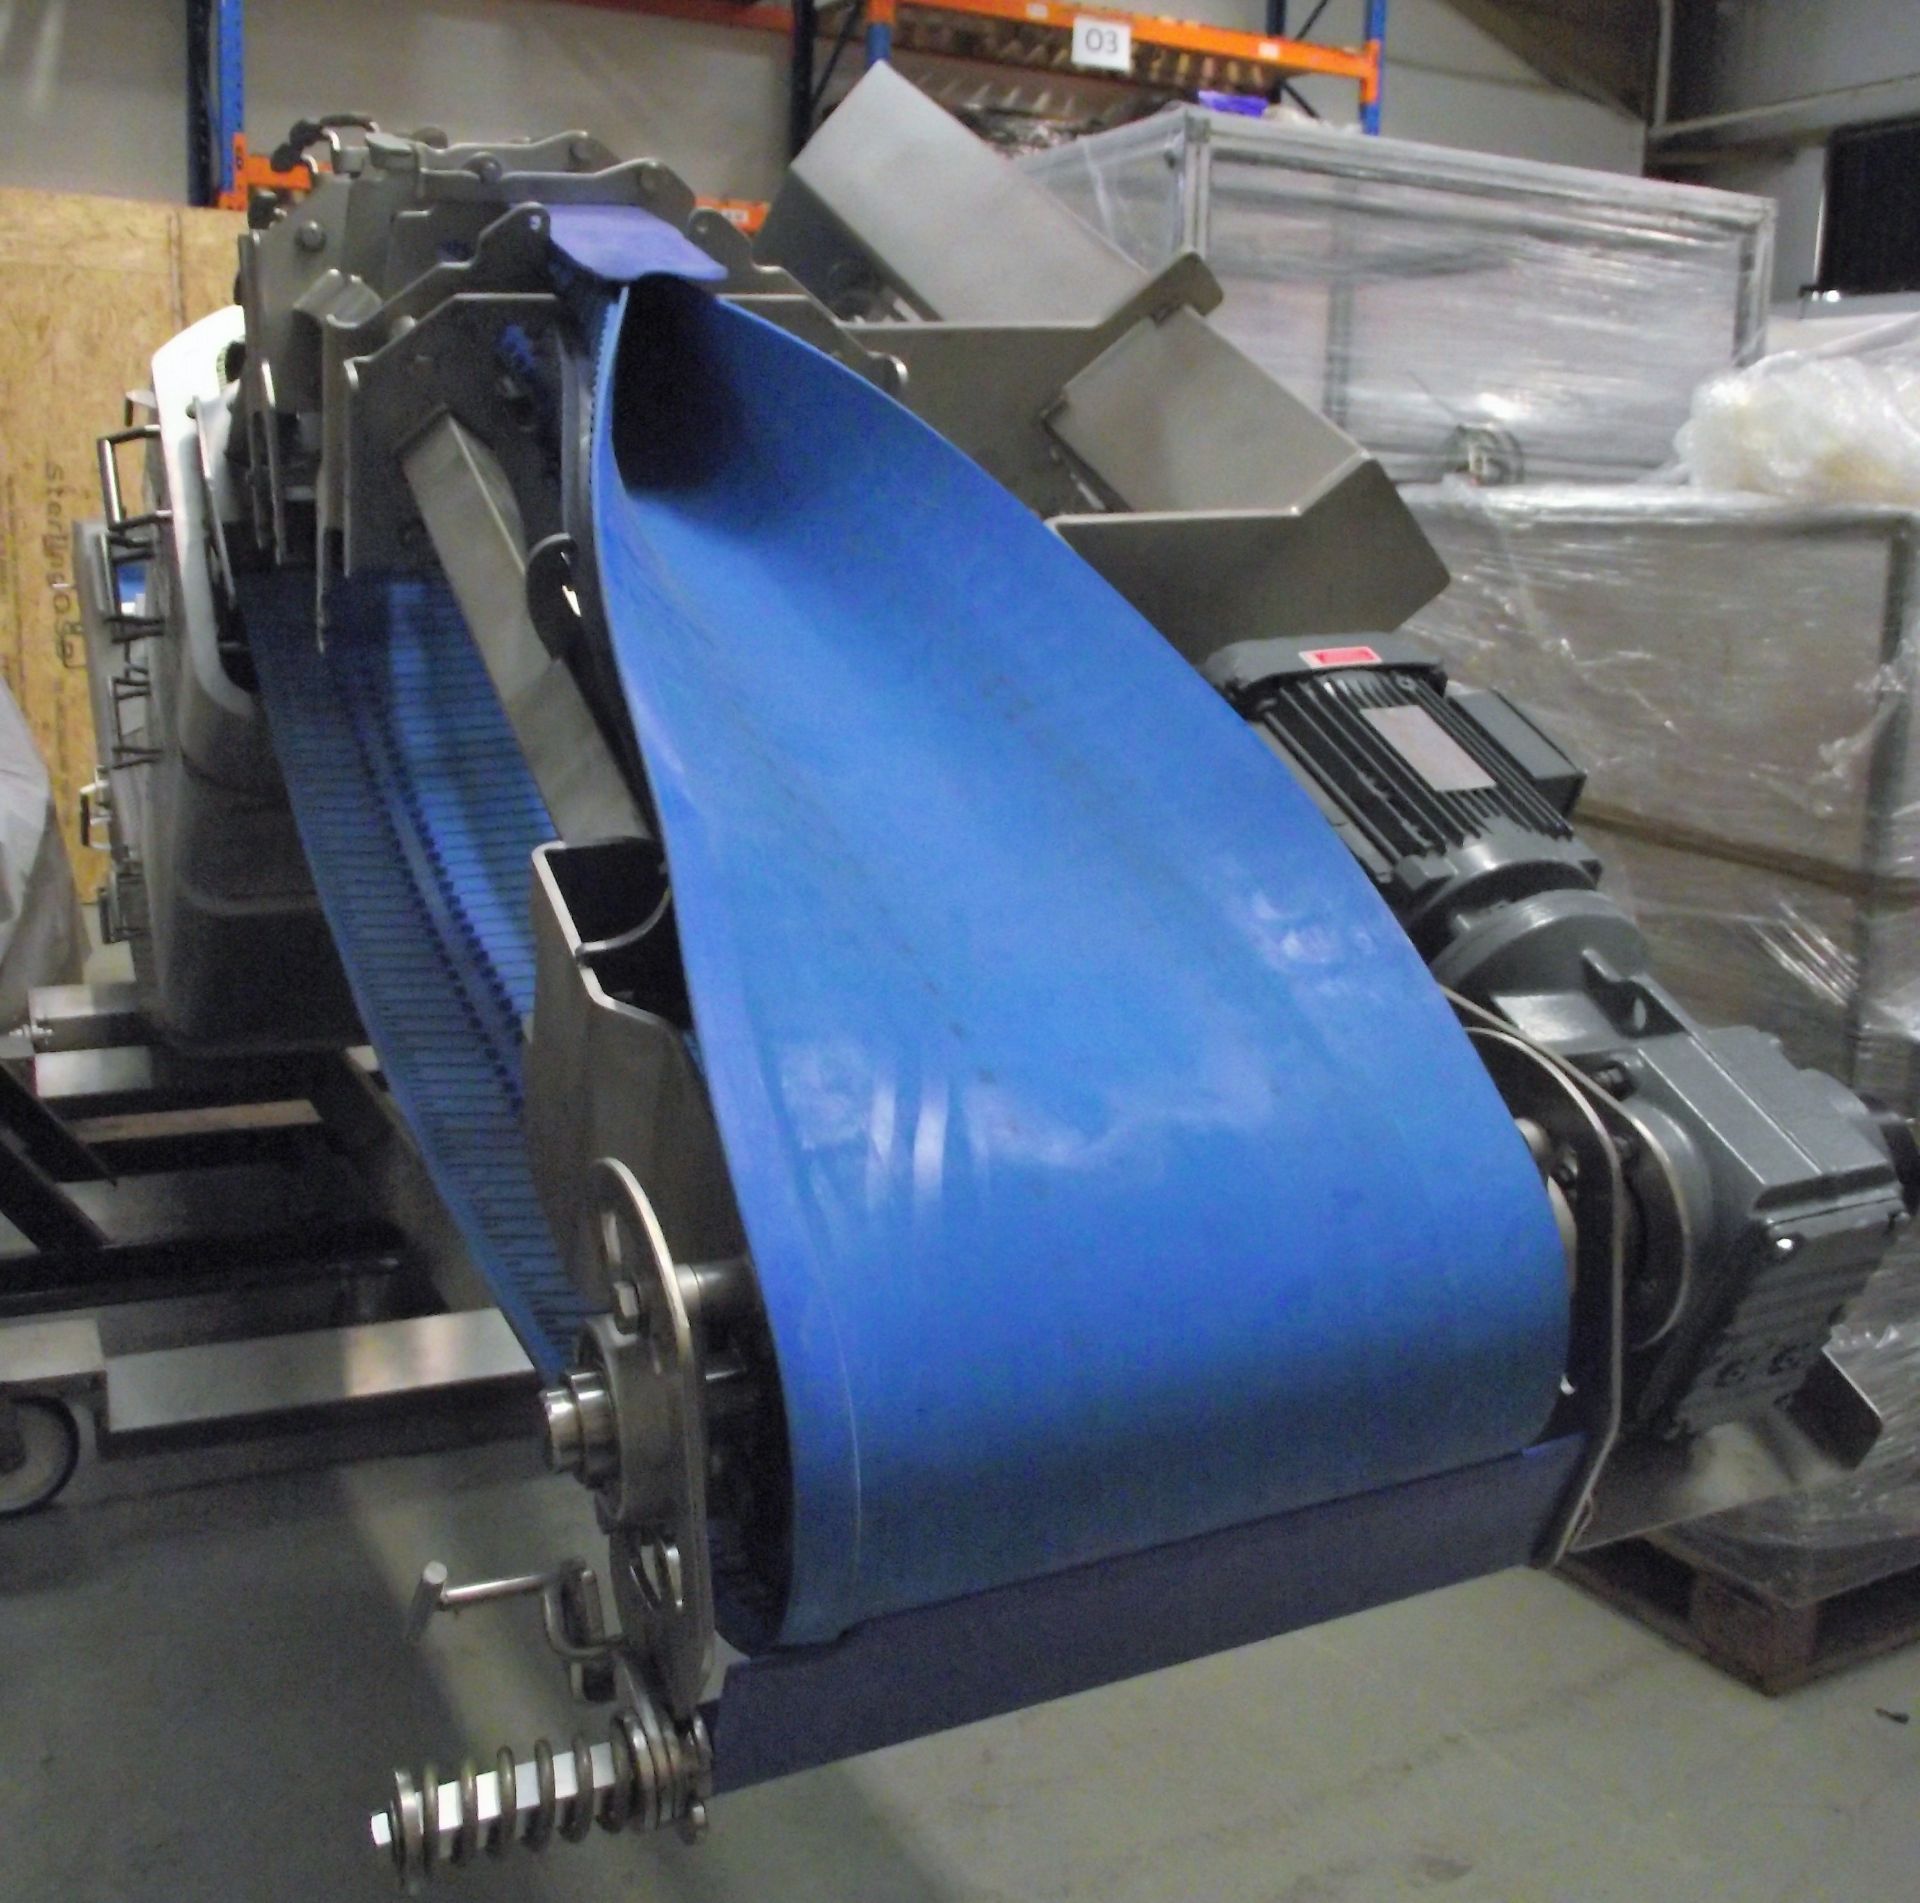 Liftvrac Inclined Conveyor & Bagging System - Image 6 of 40